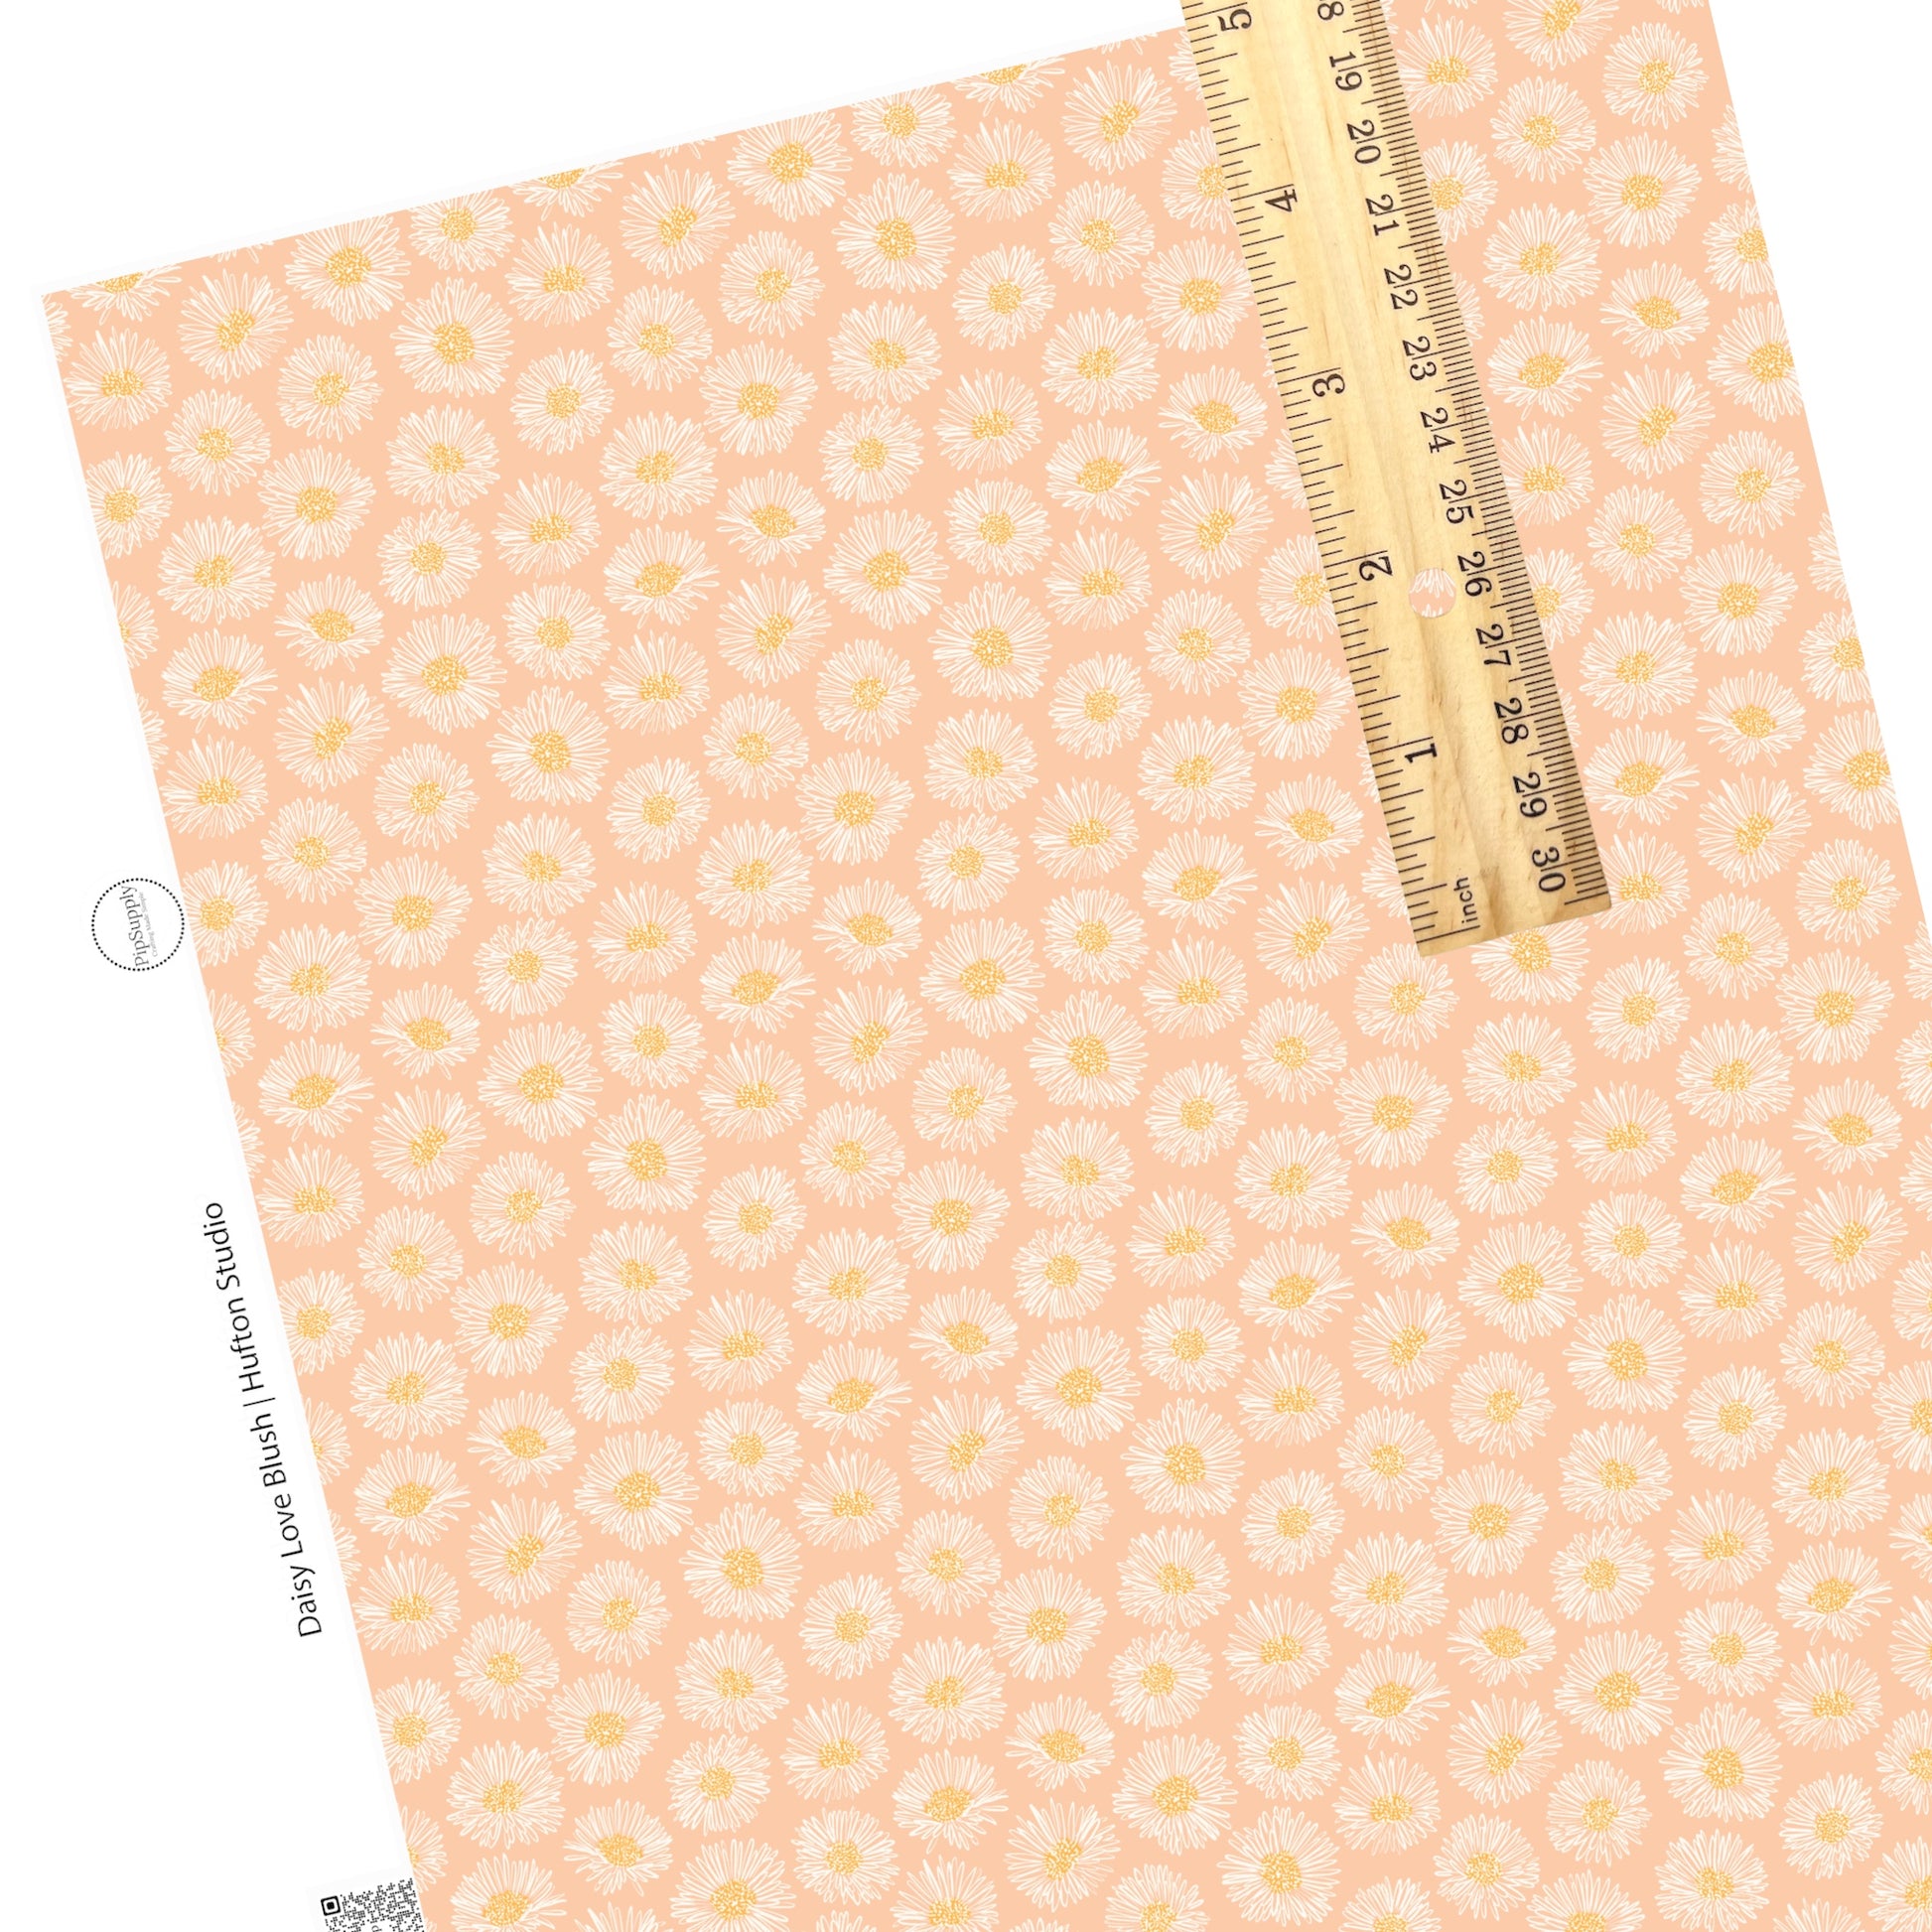 White blooming daisies with yellow center on blush faux leather sheet